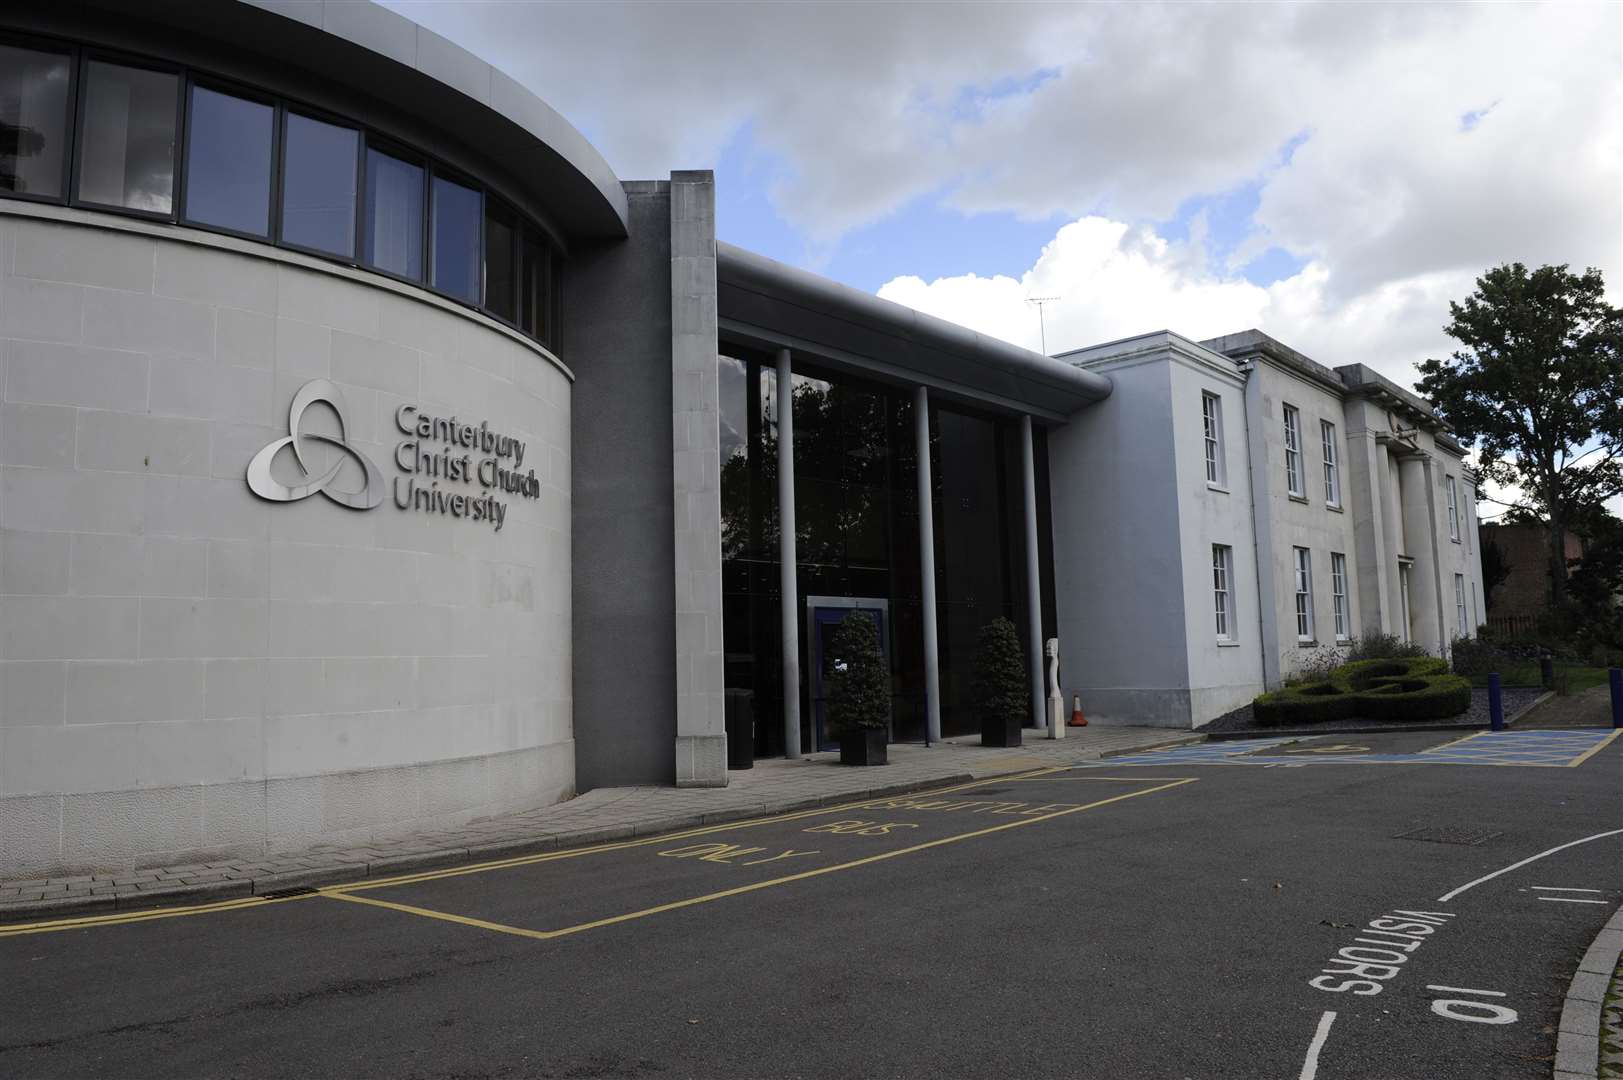 Canterbury Christ Church University has campuses in Canterbury and Medway